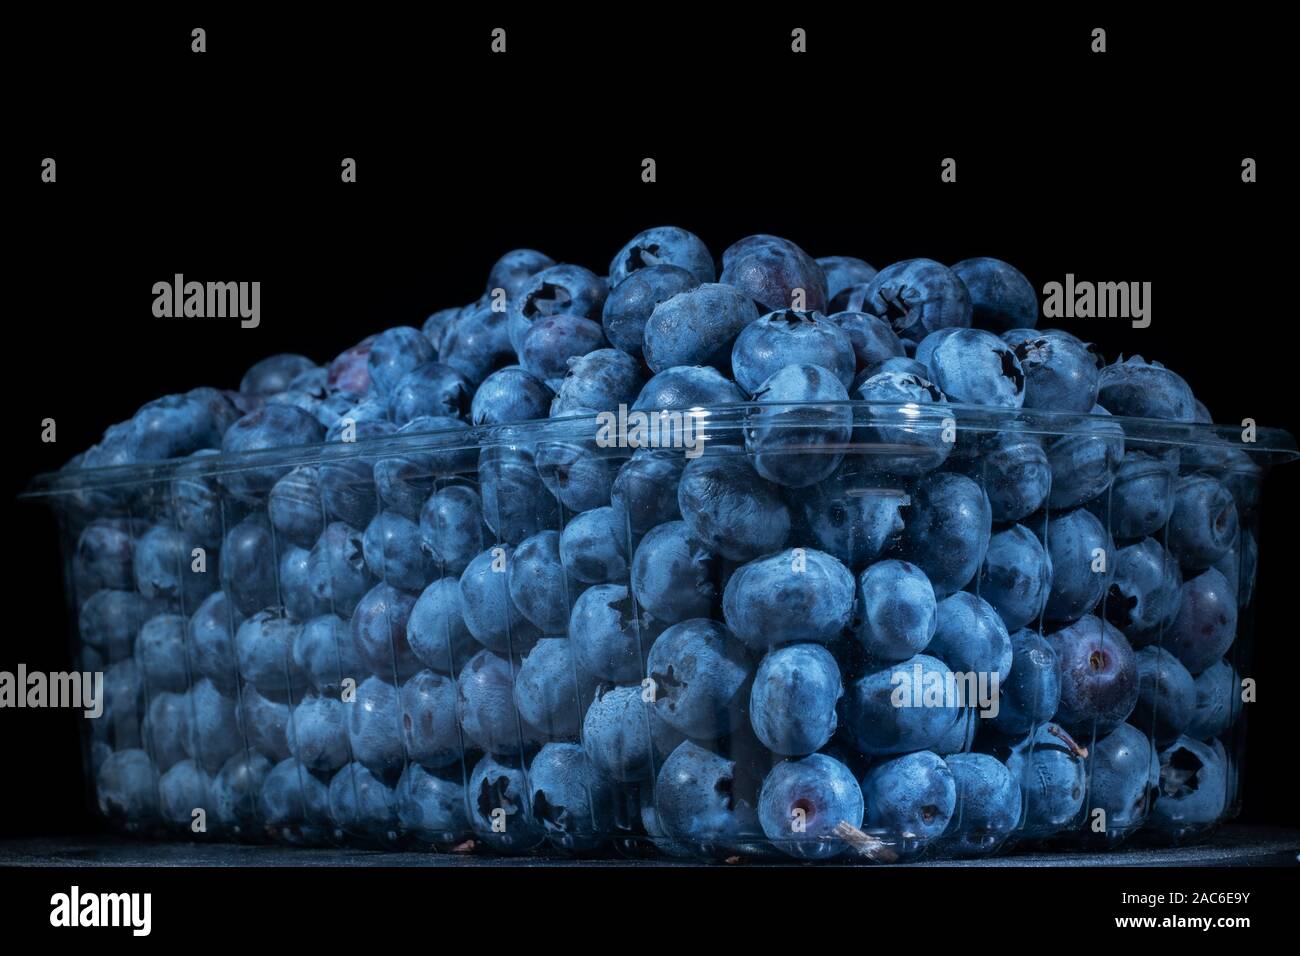 Fresh blueberries in disposable plastic food pack on black background. Close-up of Bog bilberry, bog blueberry, northern bilberry or western blueberry Stock Photo